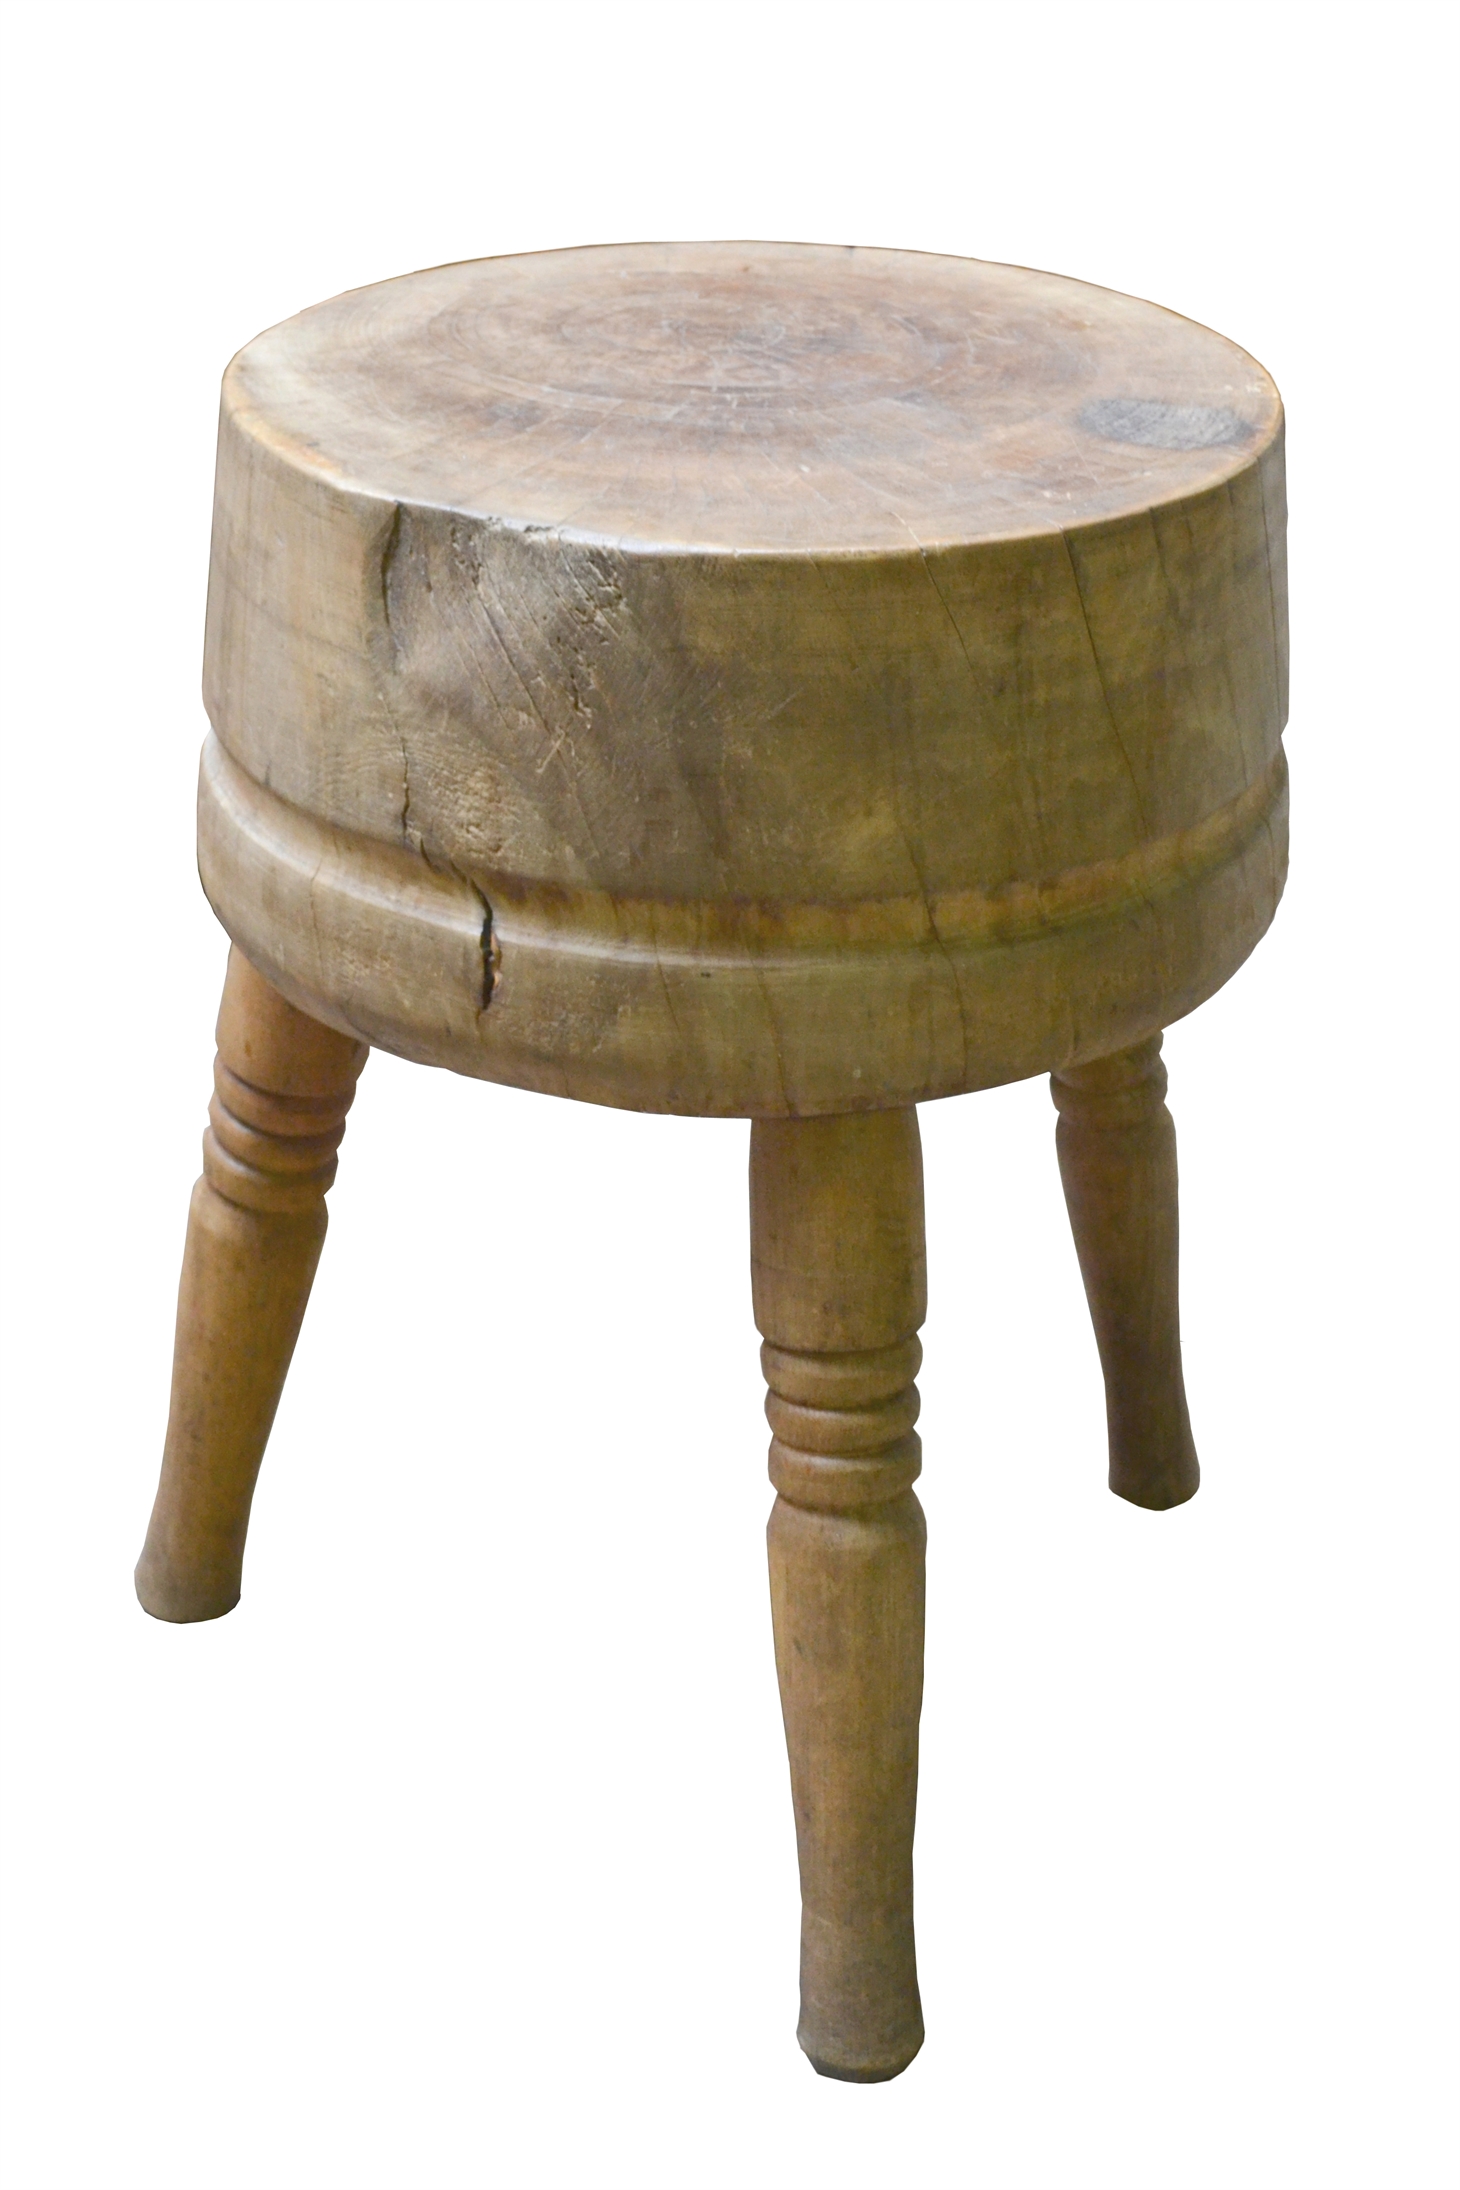 mb/3035 - Round Butcher Block Table